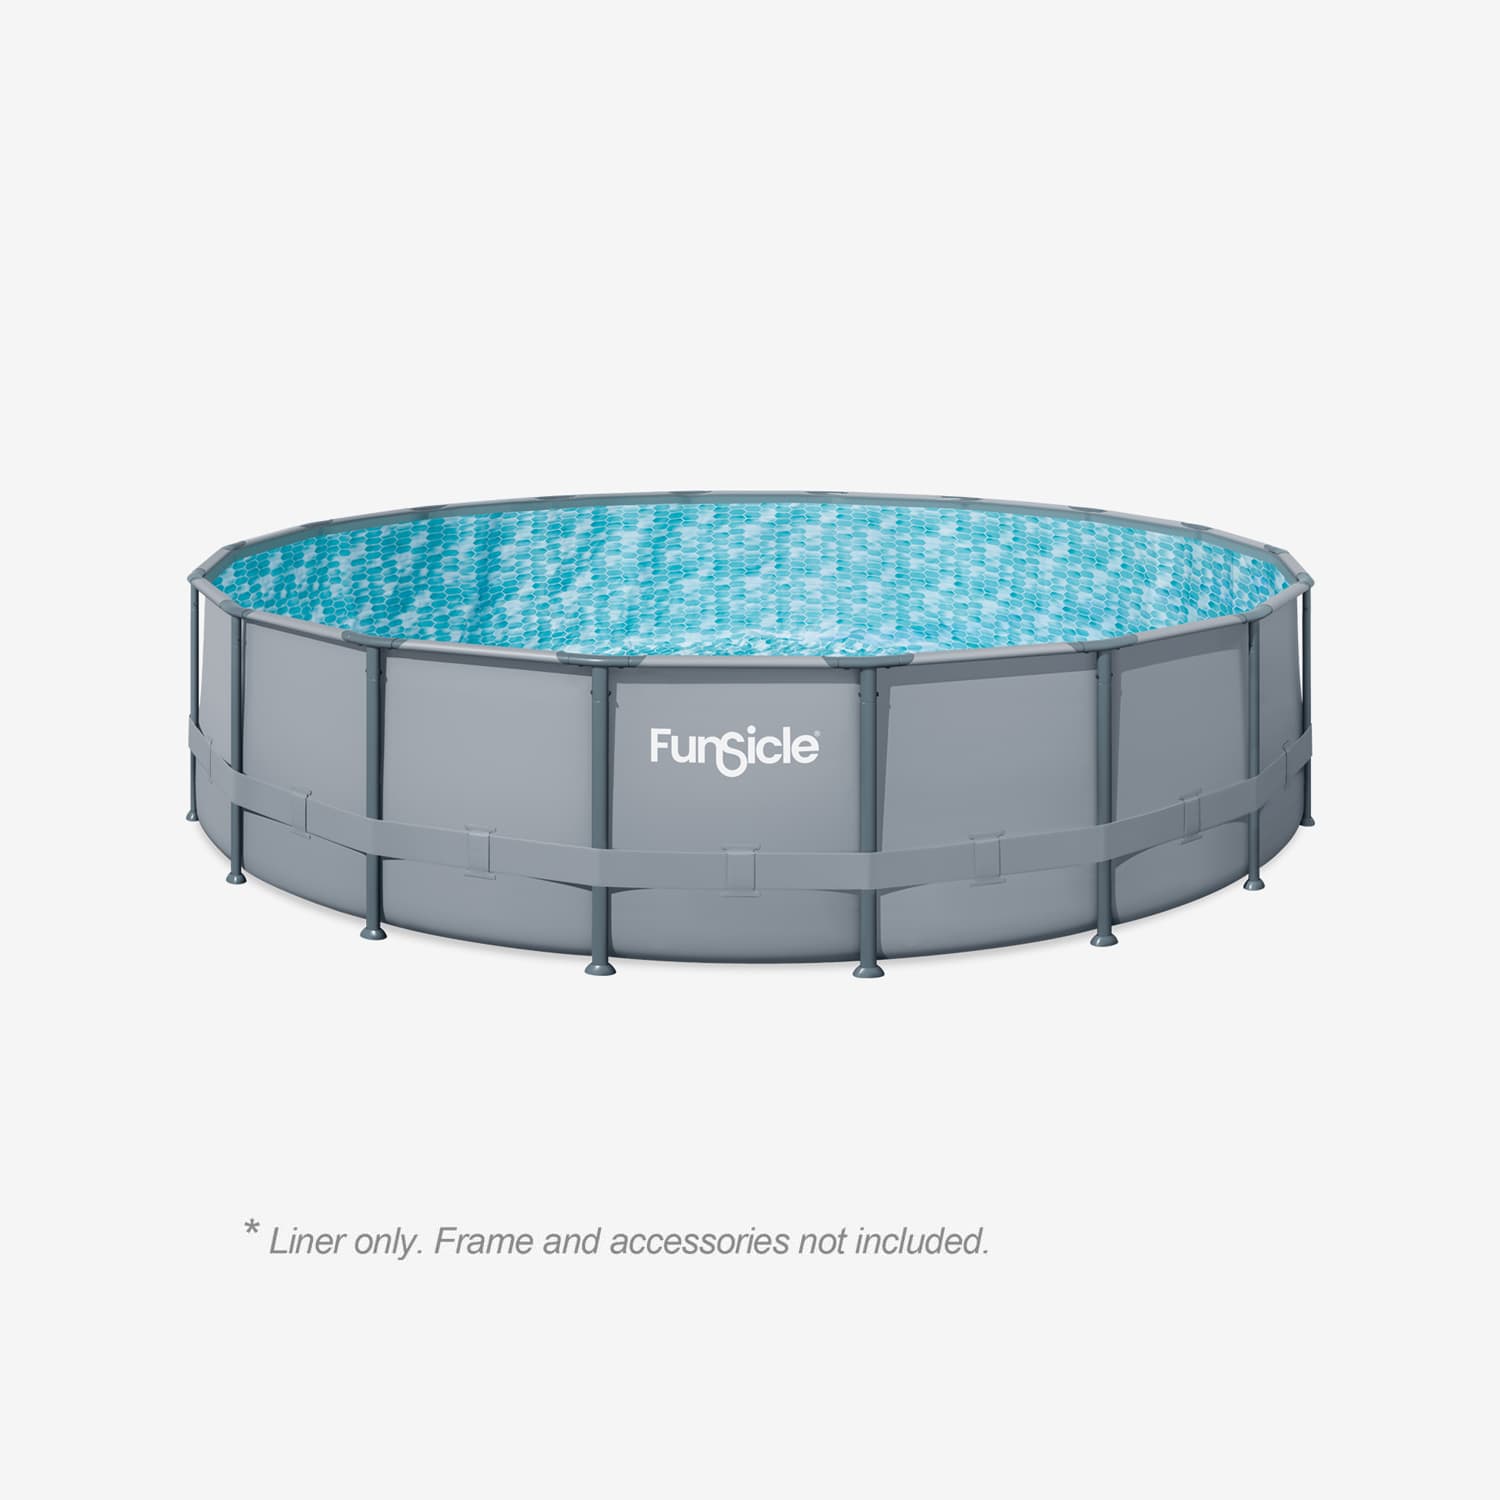 Funsicle 18 ft Oasis Pool Liner